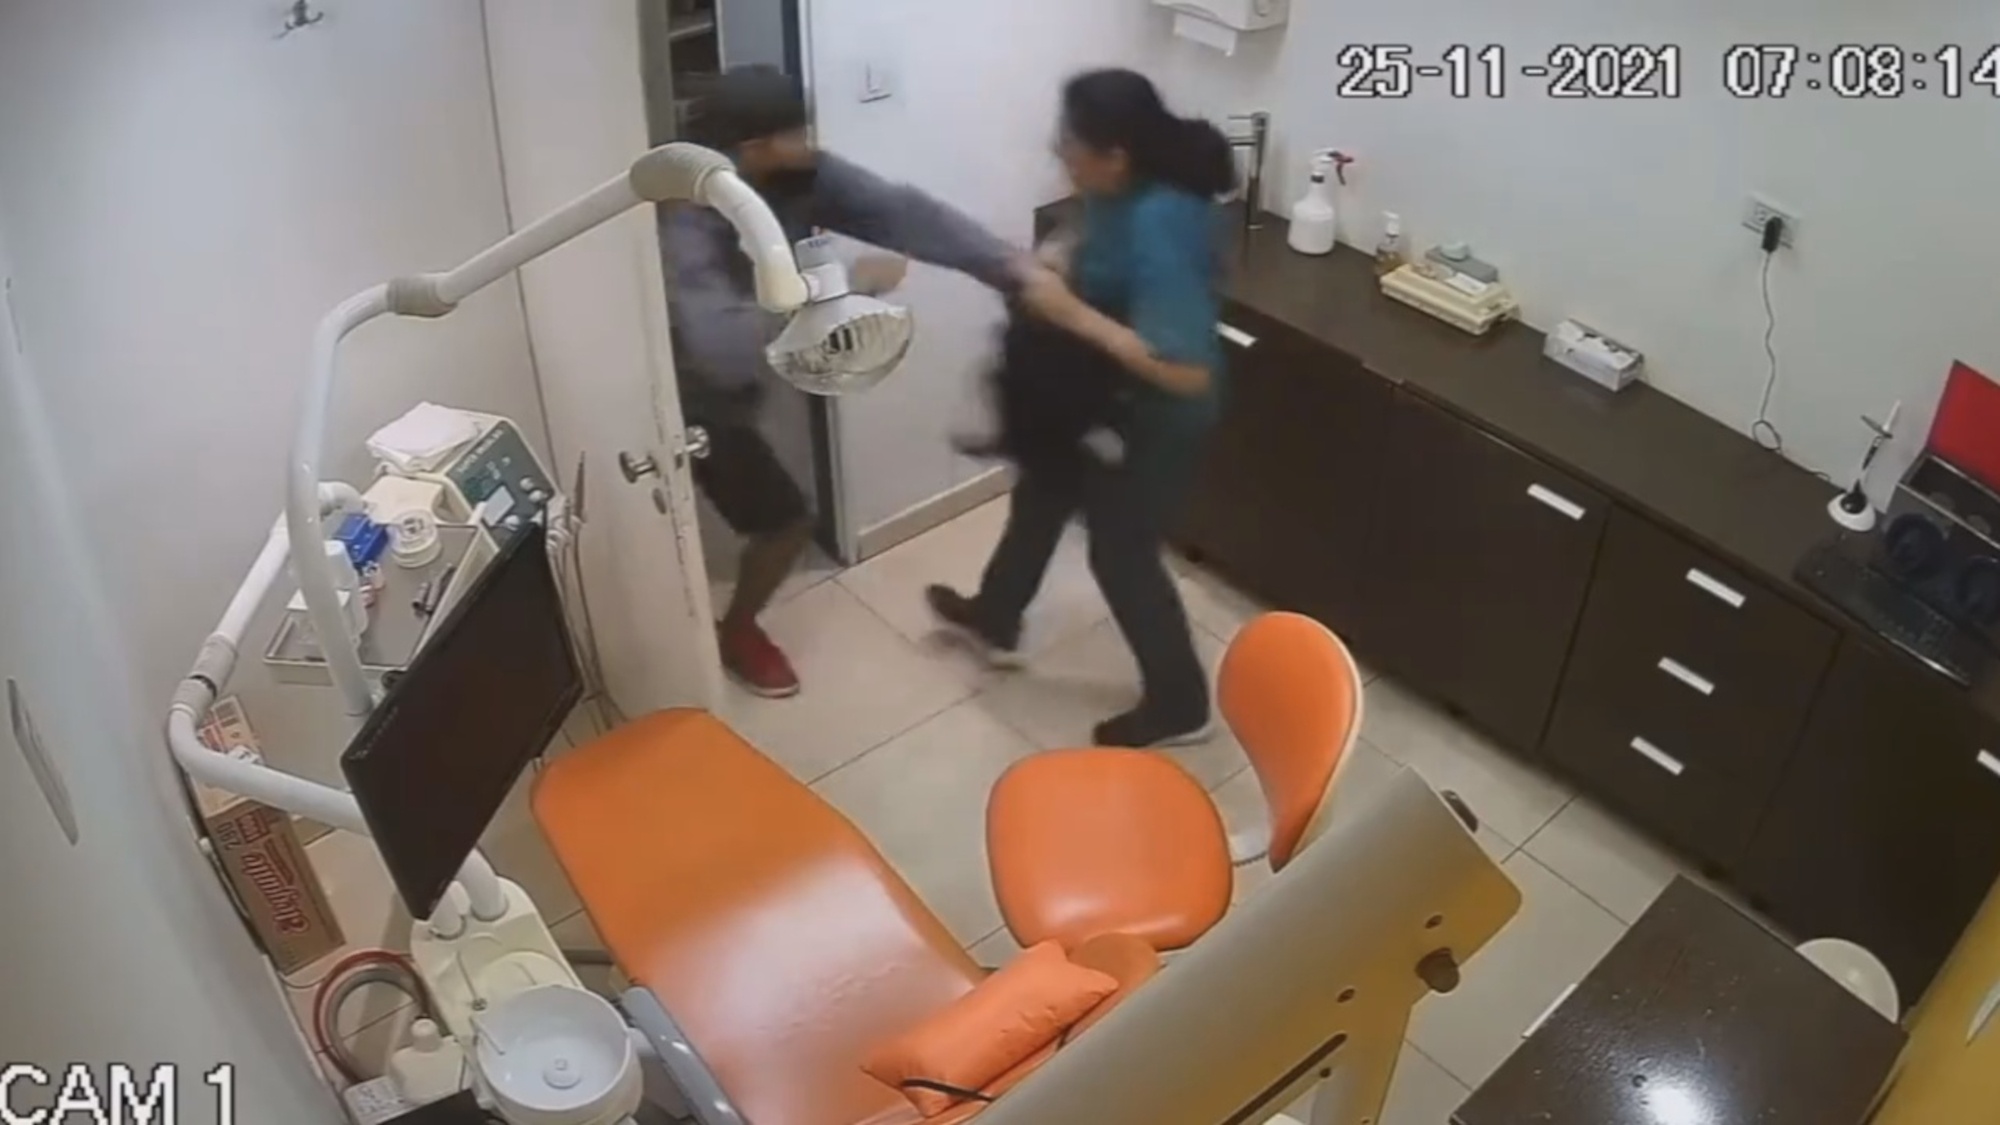 Read more about the article Moment Robber Knocks Out Womans Teeth At Dentist Trying To Steal Her Backpack